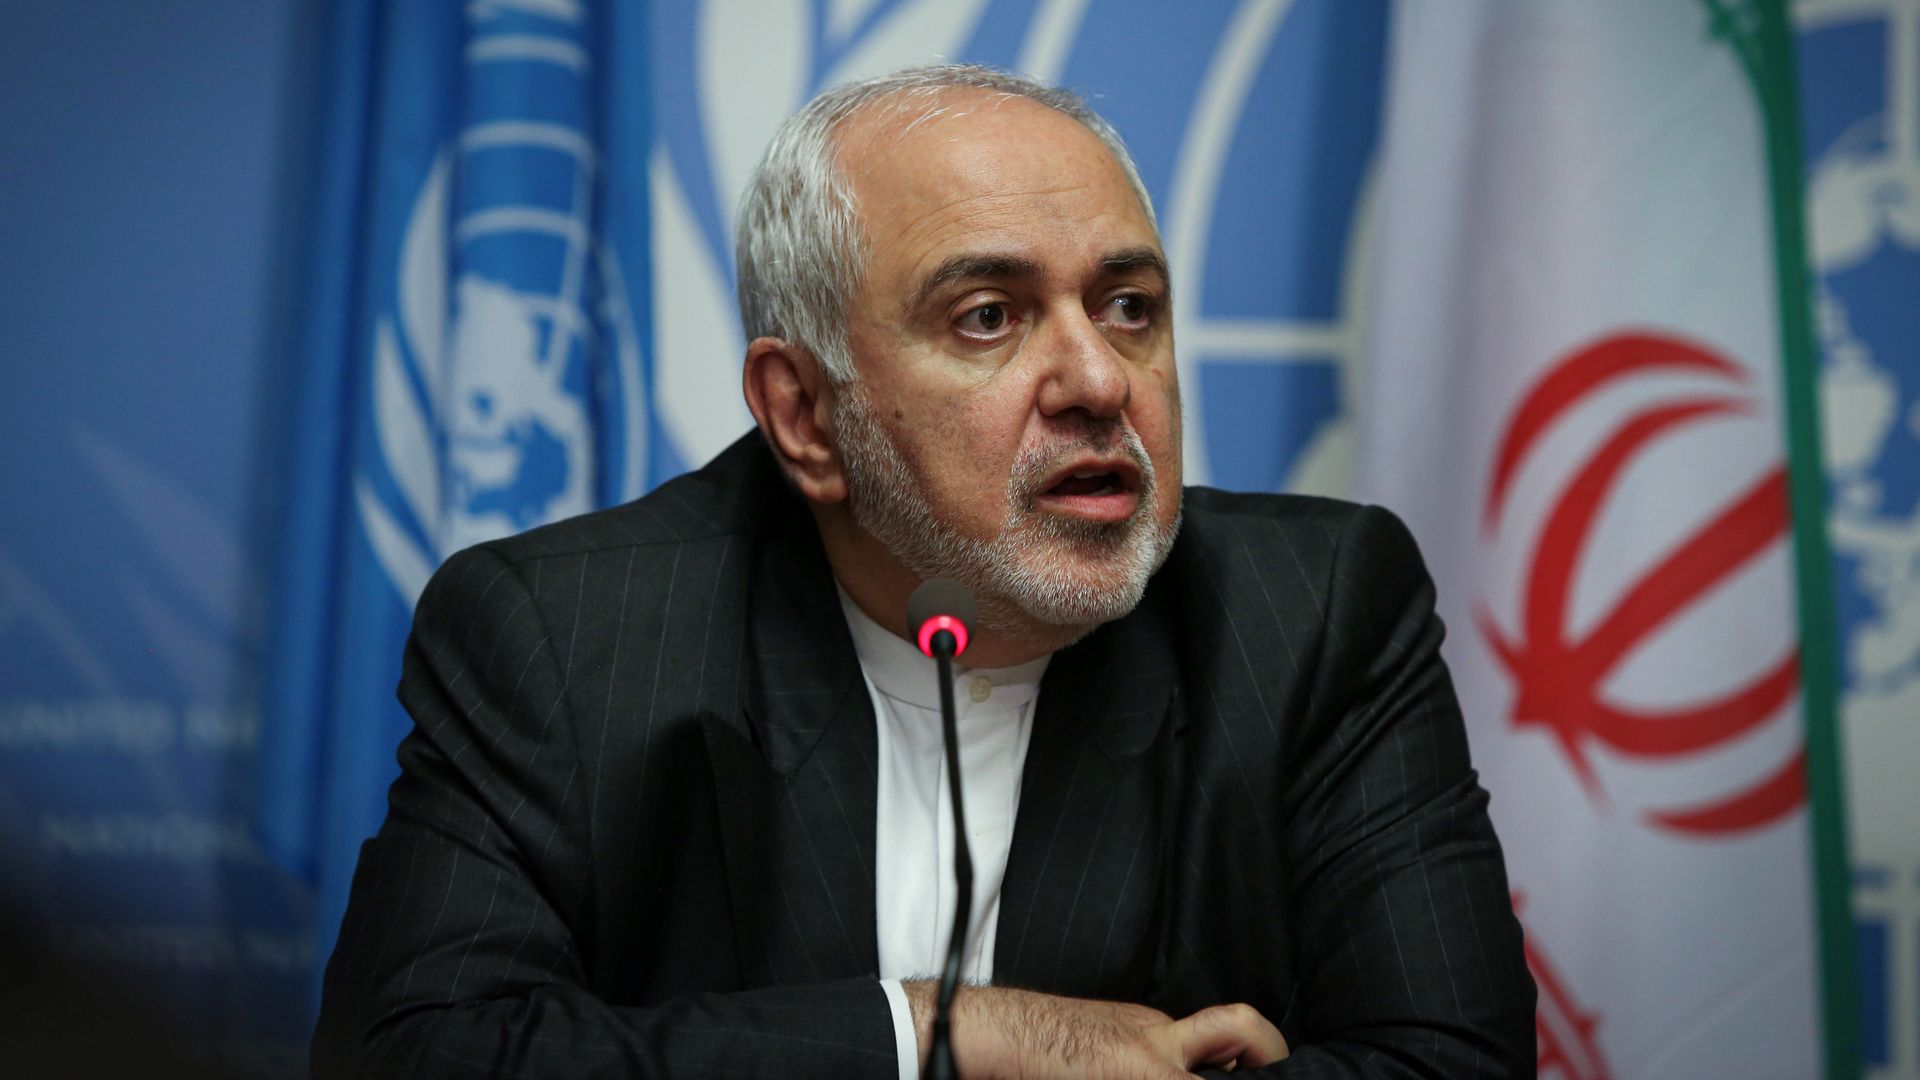 Iranian Foreign Minister Javad Zarif is seen speaking during a news conference.